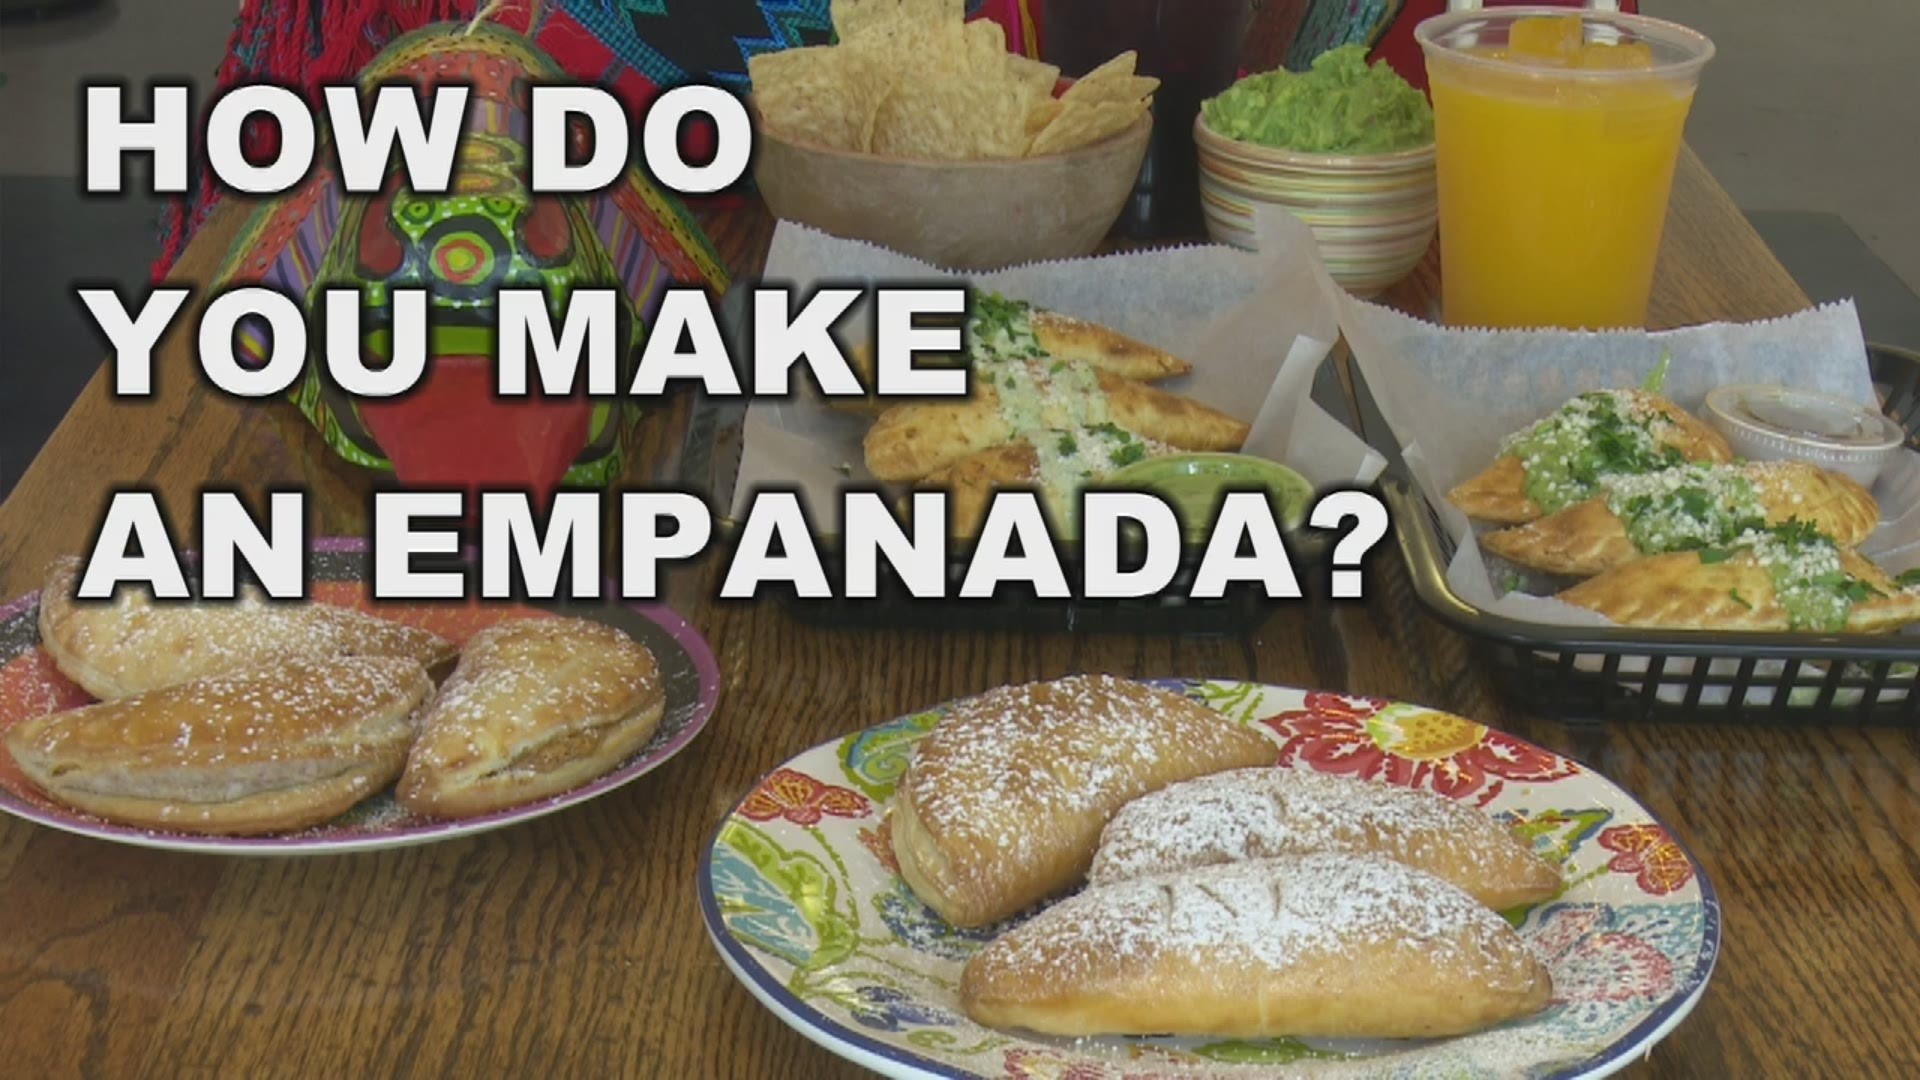 Rodolfo Bianchi, owner of The Empanada CookHouse, provided a quick look at the process behind creating an empanada.